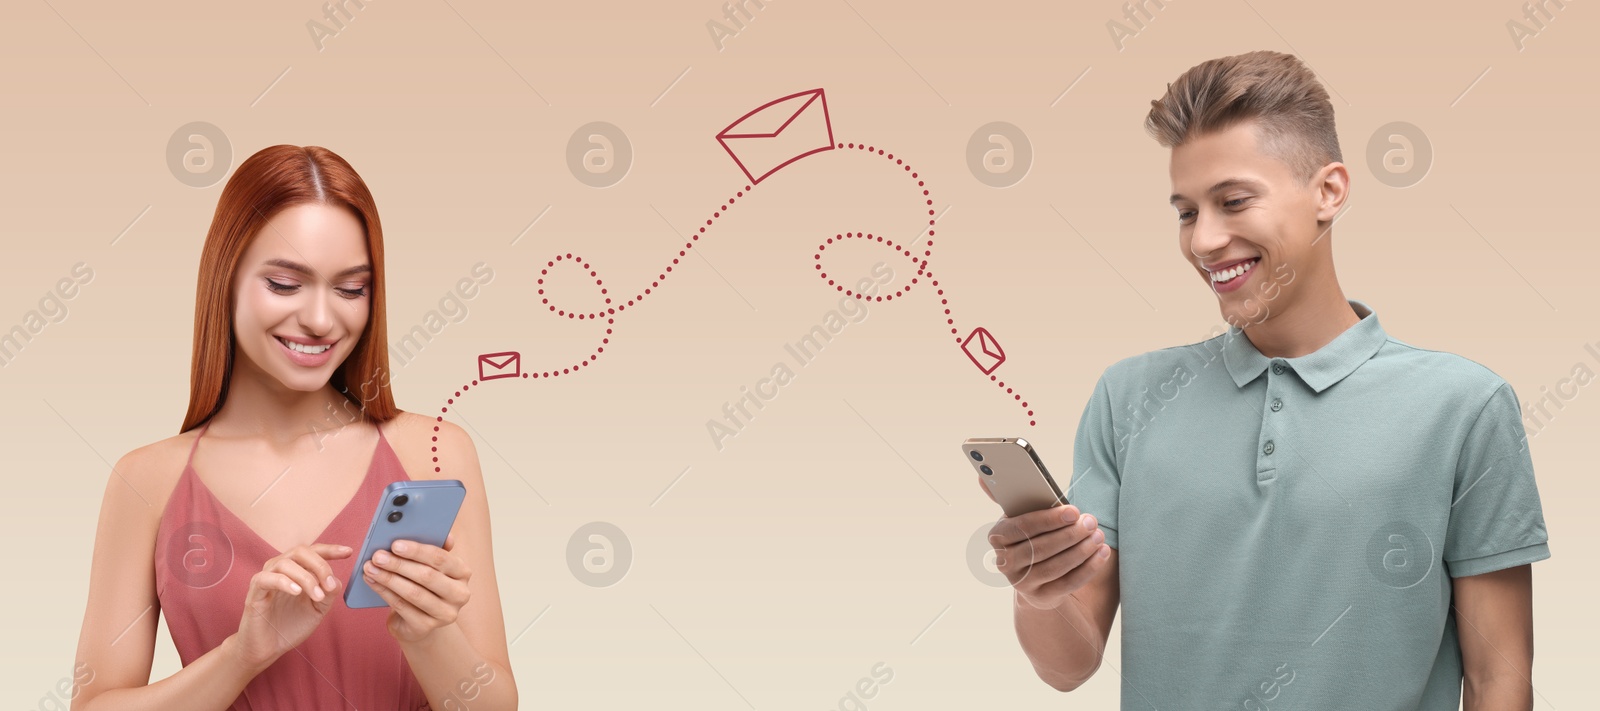 Image of Man and woman with smartphones messaging on color gradient background, banner design. Drawing of envelopes between them